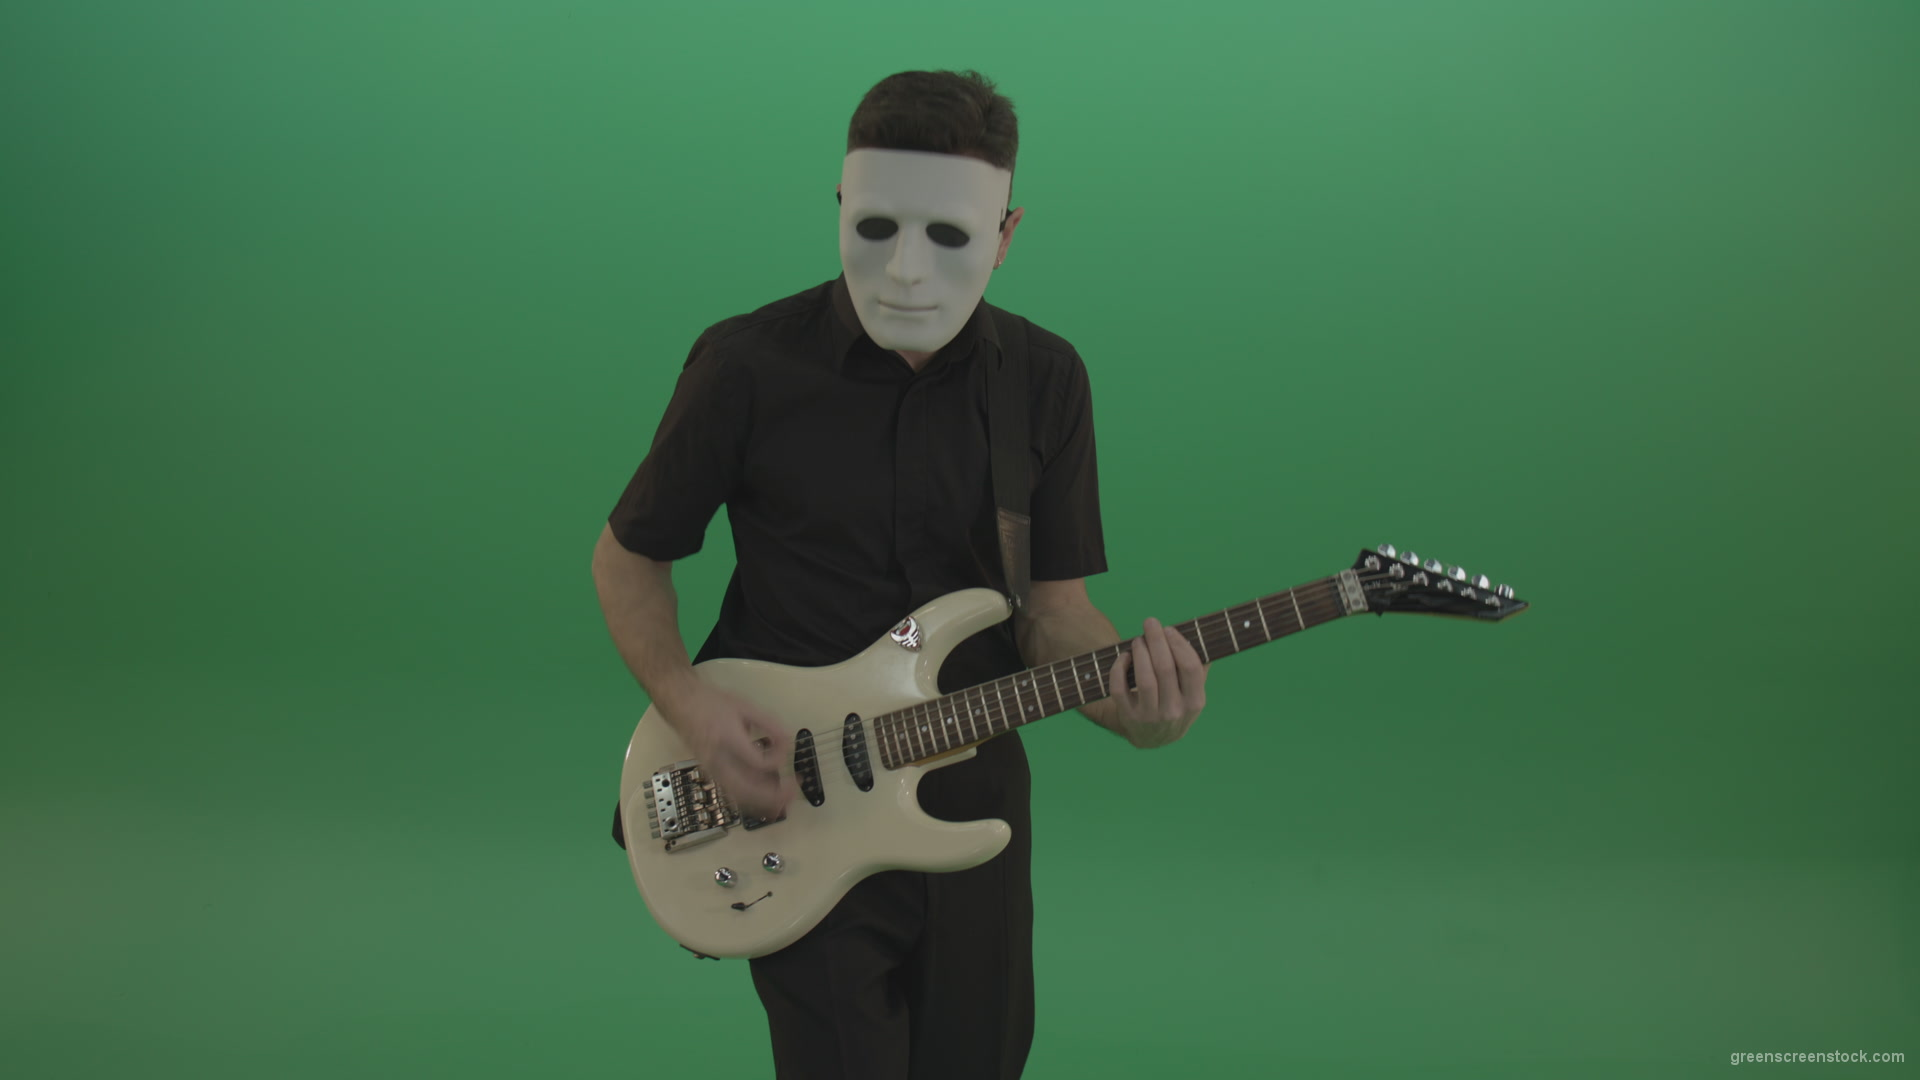 Rock-man-in-white-mask-and-black-wear-playing-guitar-isolated-on-green-screen-in-front-view_009 Green Screen Stock